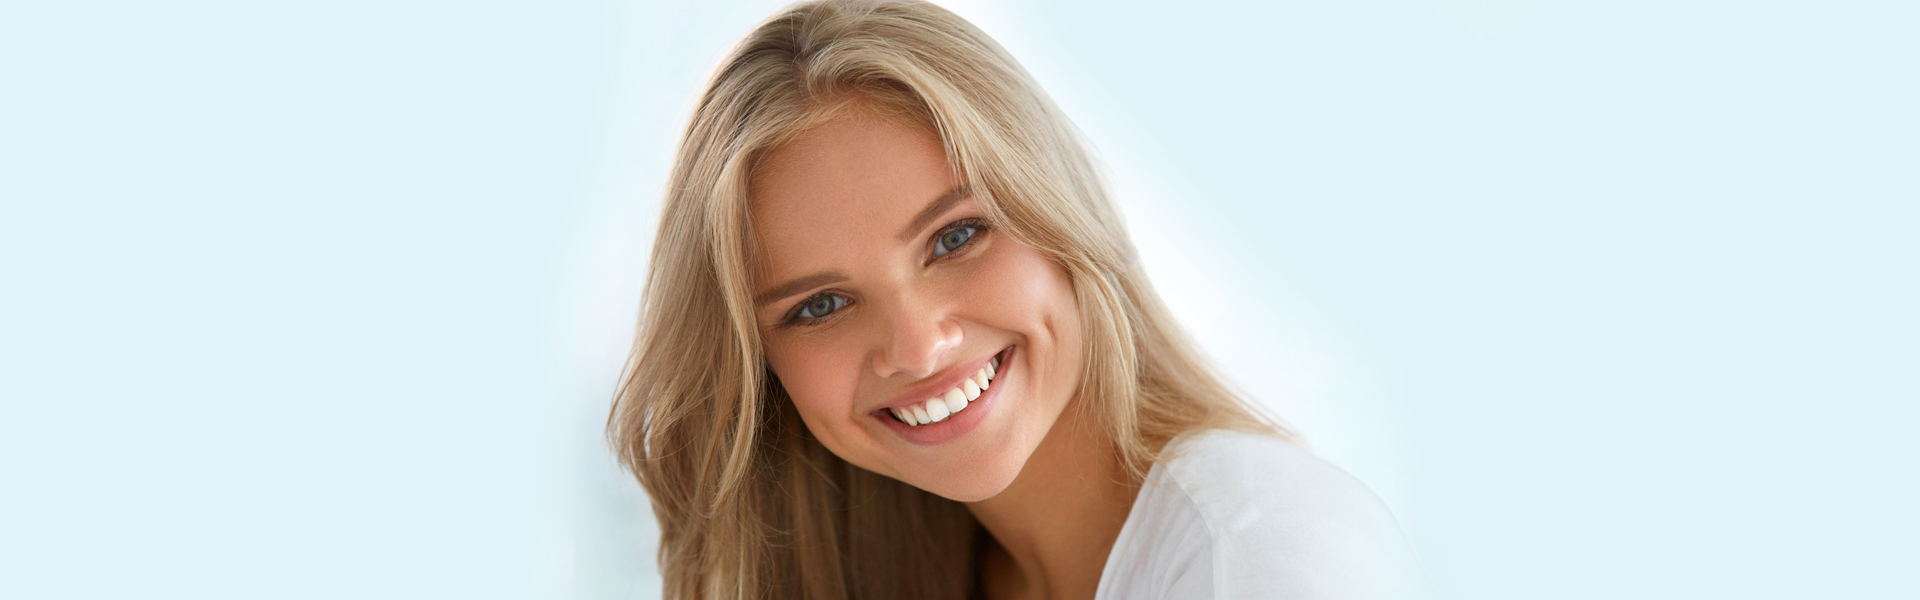 Same-Day Smile Services Can Correct Many Dental Issues